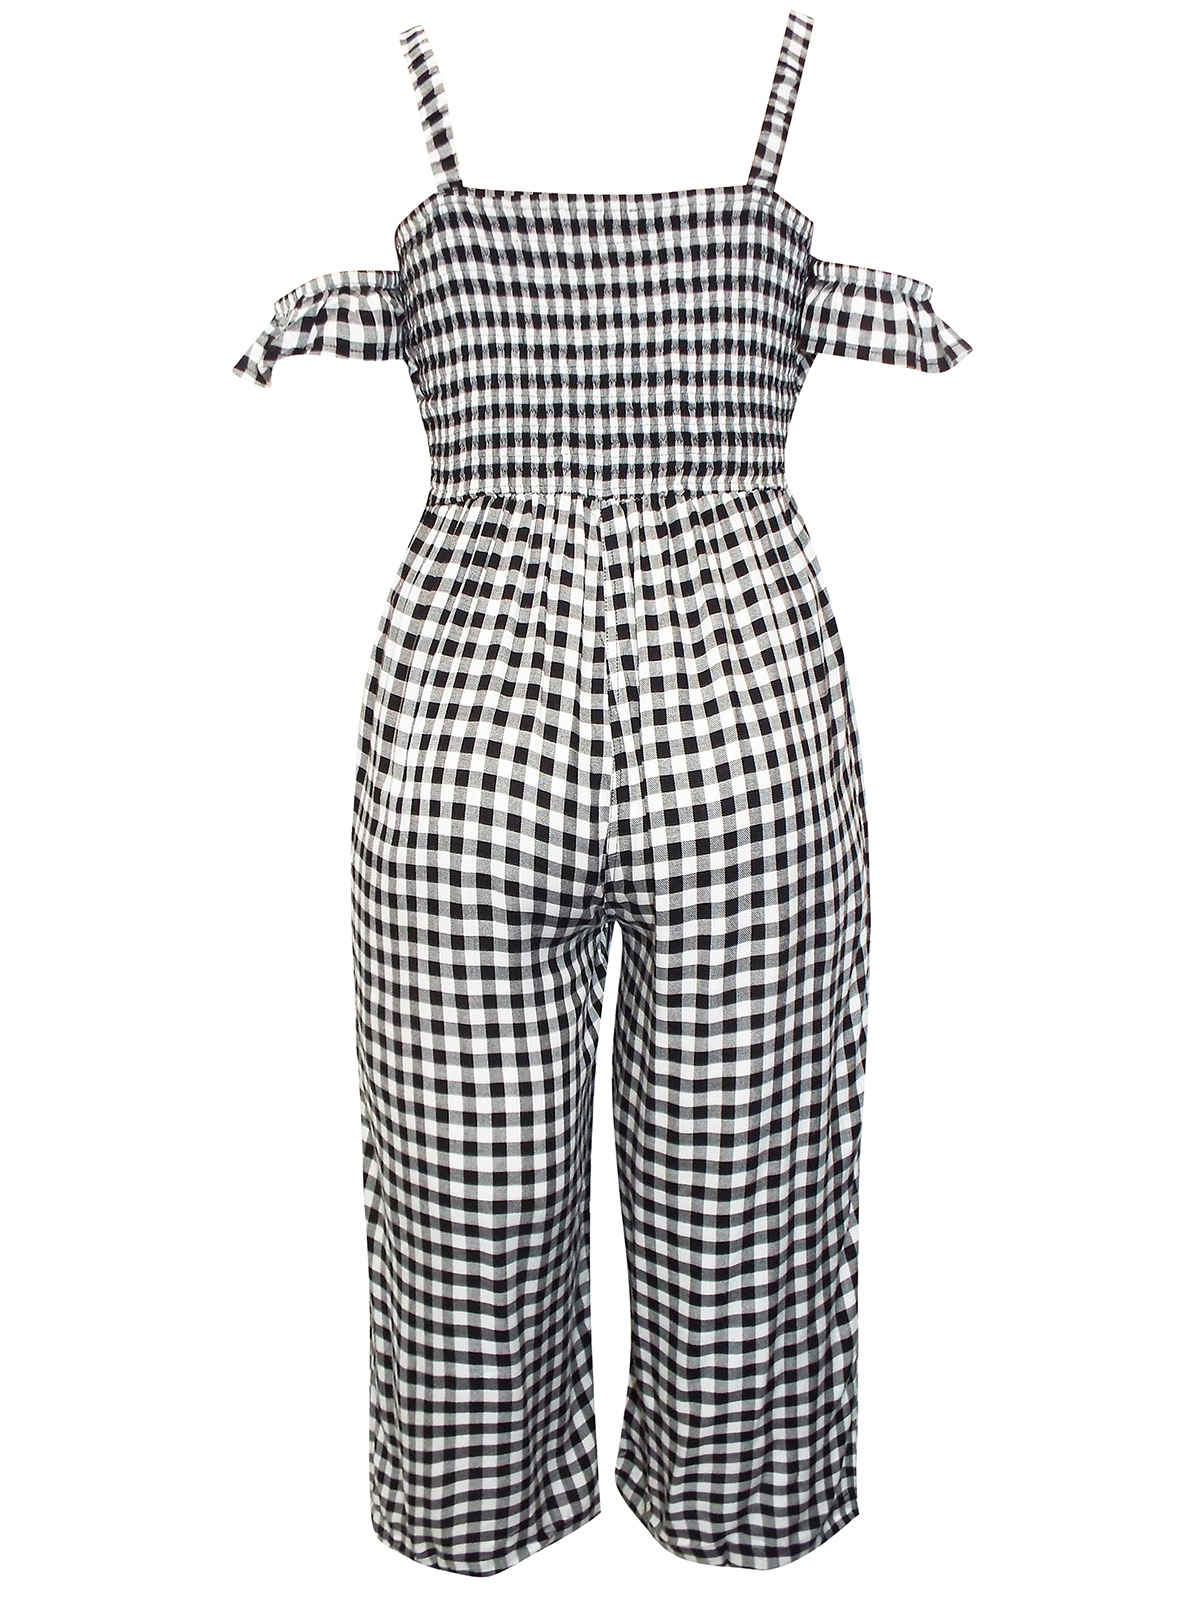 Plus Size wholesale clothing by simply be - - SimplyBe BLACK Gingham ...